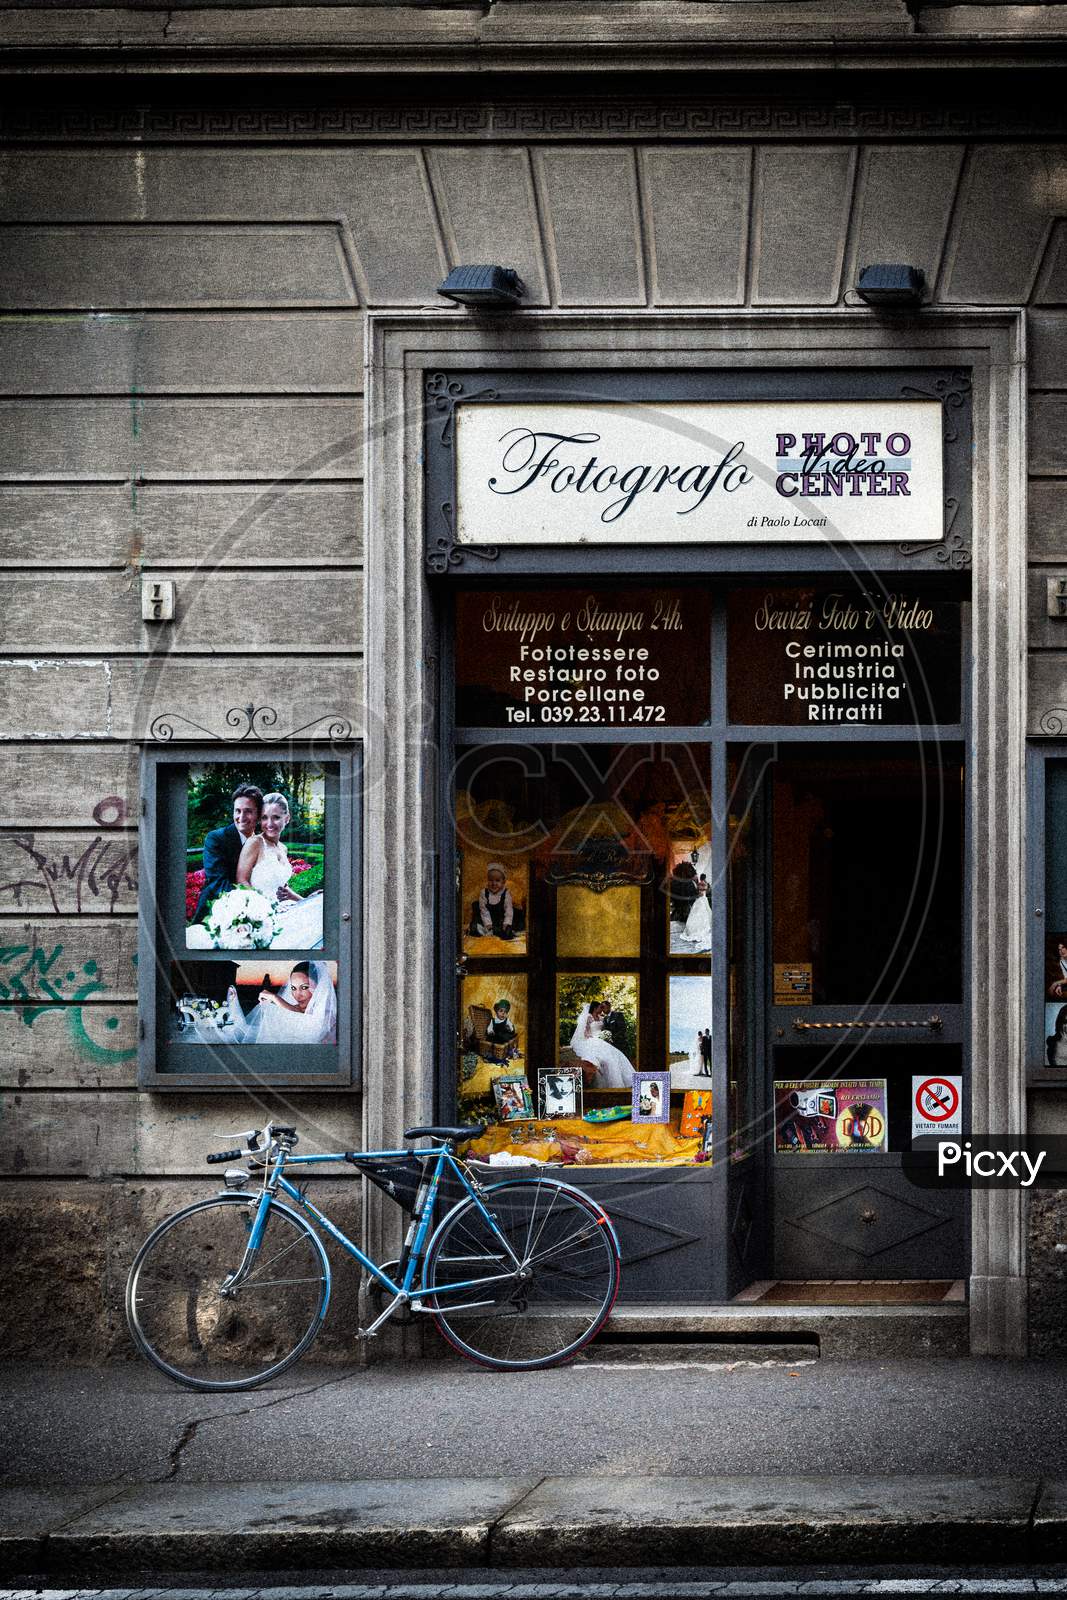 Monza, Italy/Europe - October 28 : Bicycle Outside A Photography Shop In Monza Italy On October 28, 2010